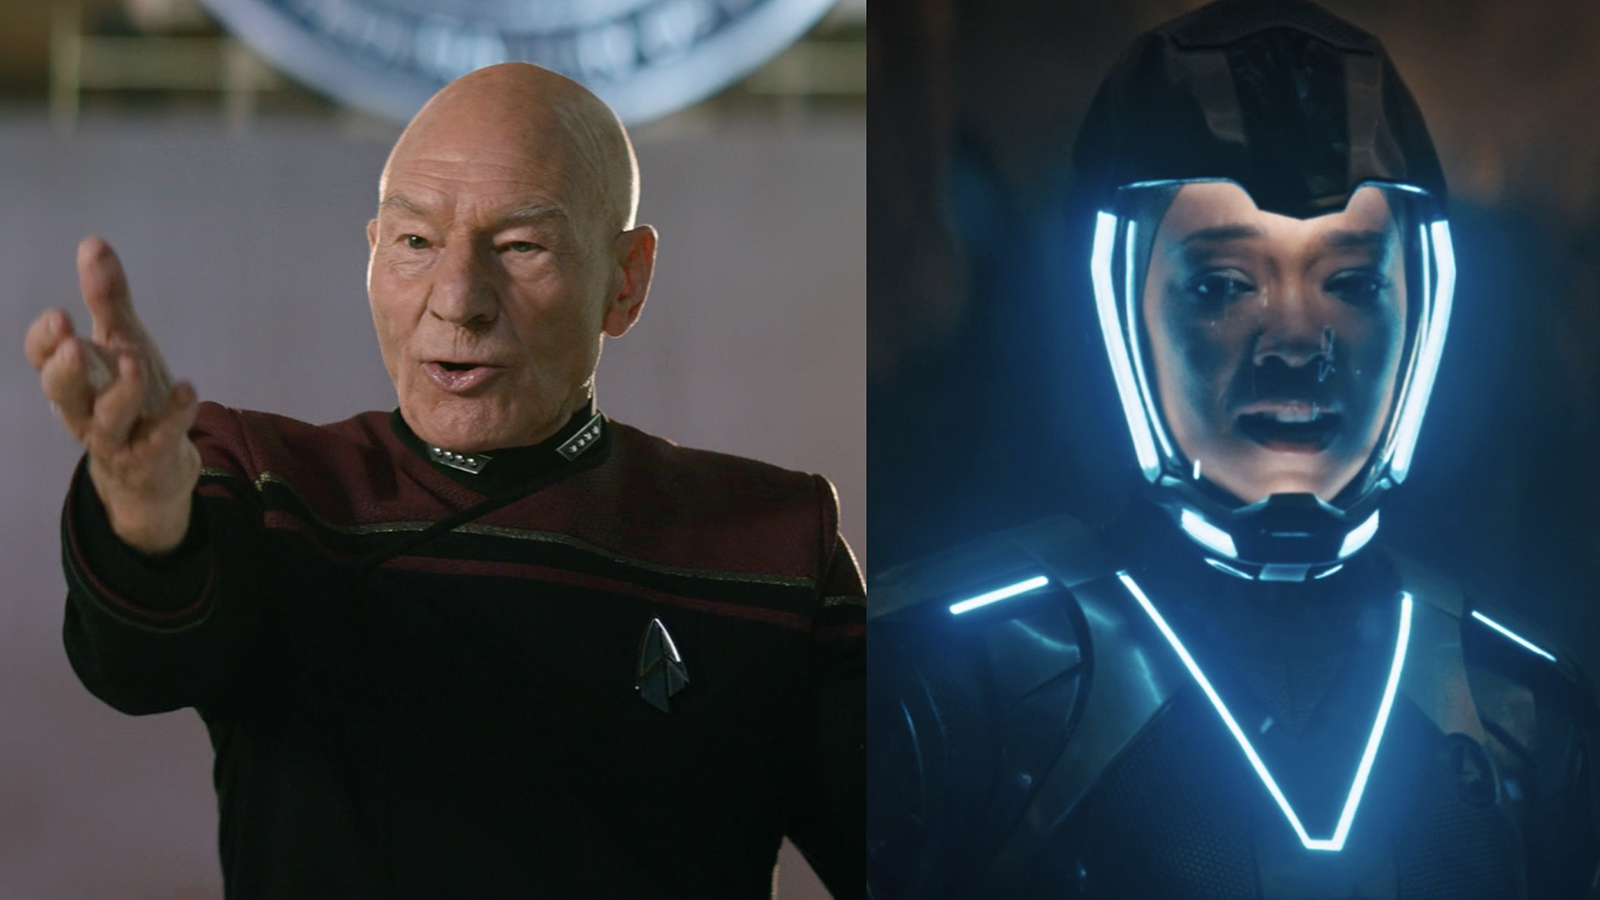 Star Trek: Picard,' cargo cults and the perils of success